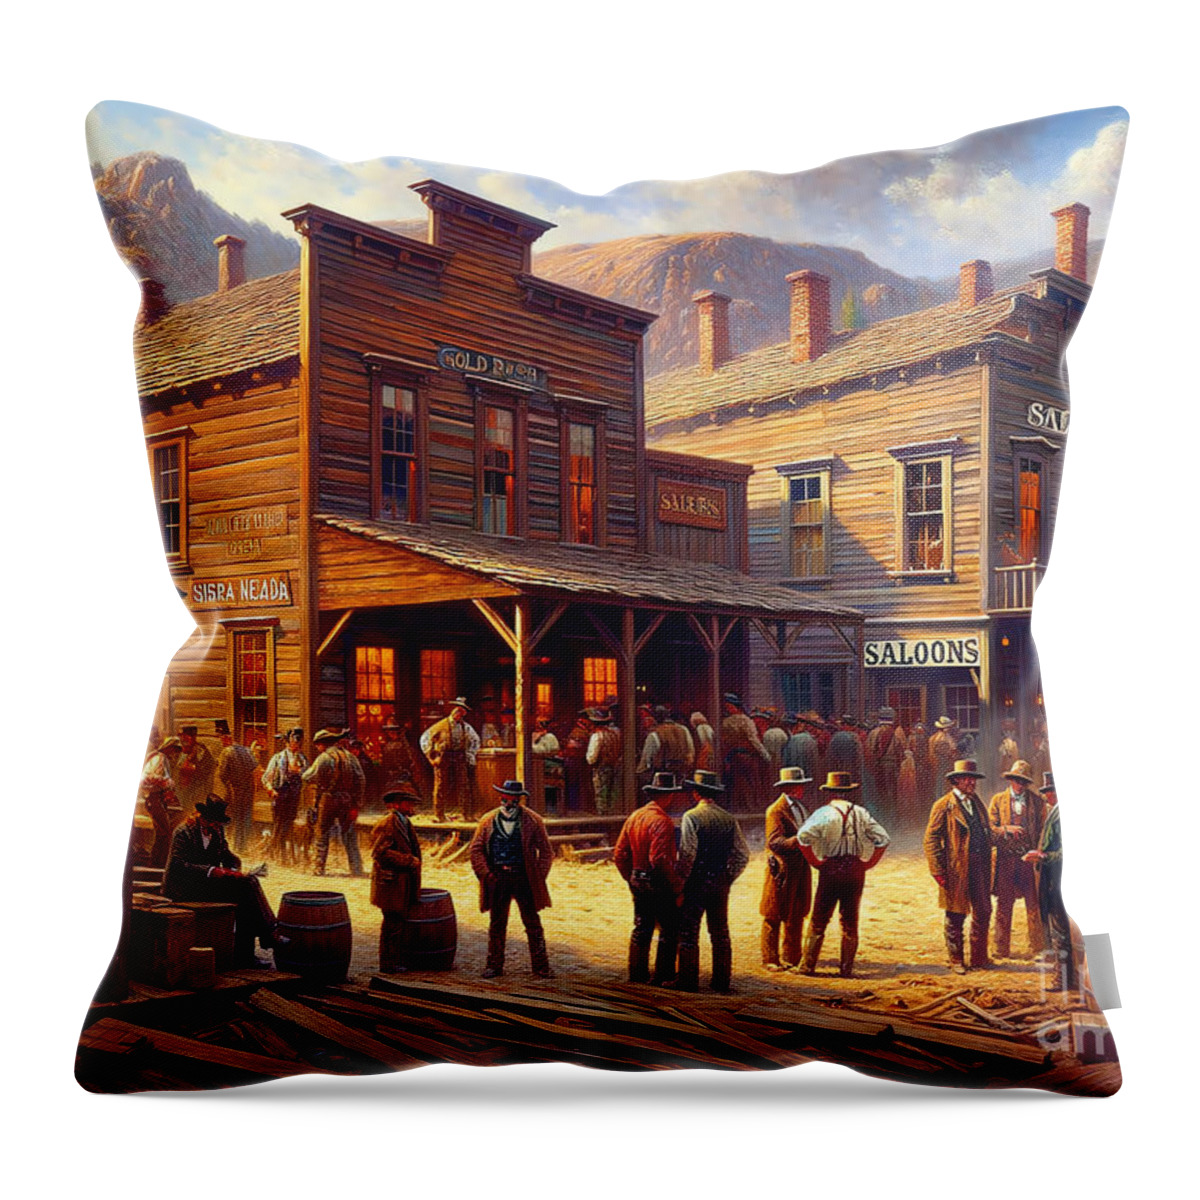 Gold Rush Throw Pillow featuring the painting A gold rush town in the Sierra Nevada, with miners and saloons. by Jeff Creation